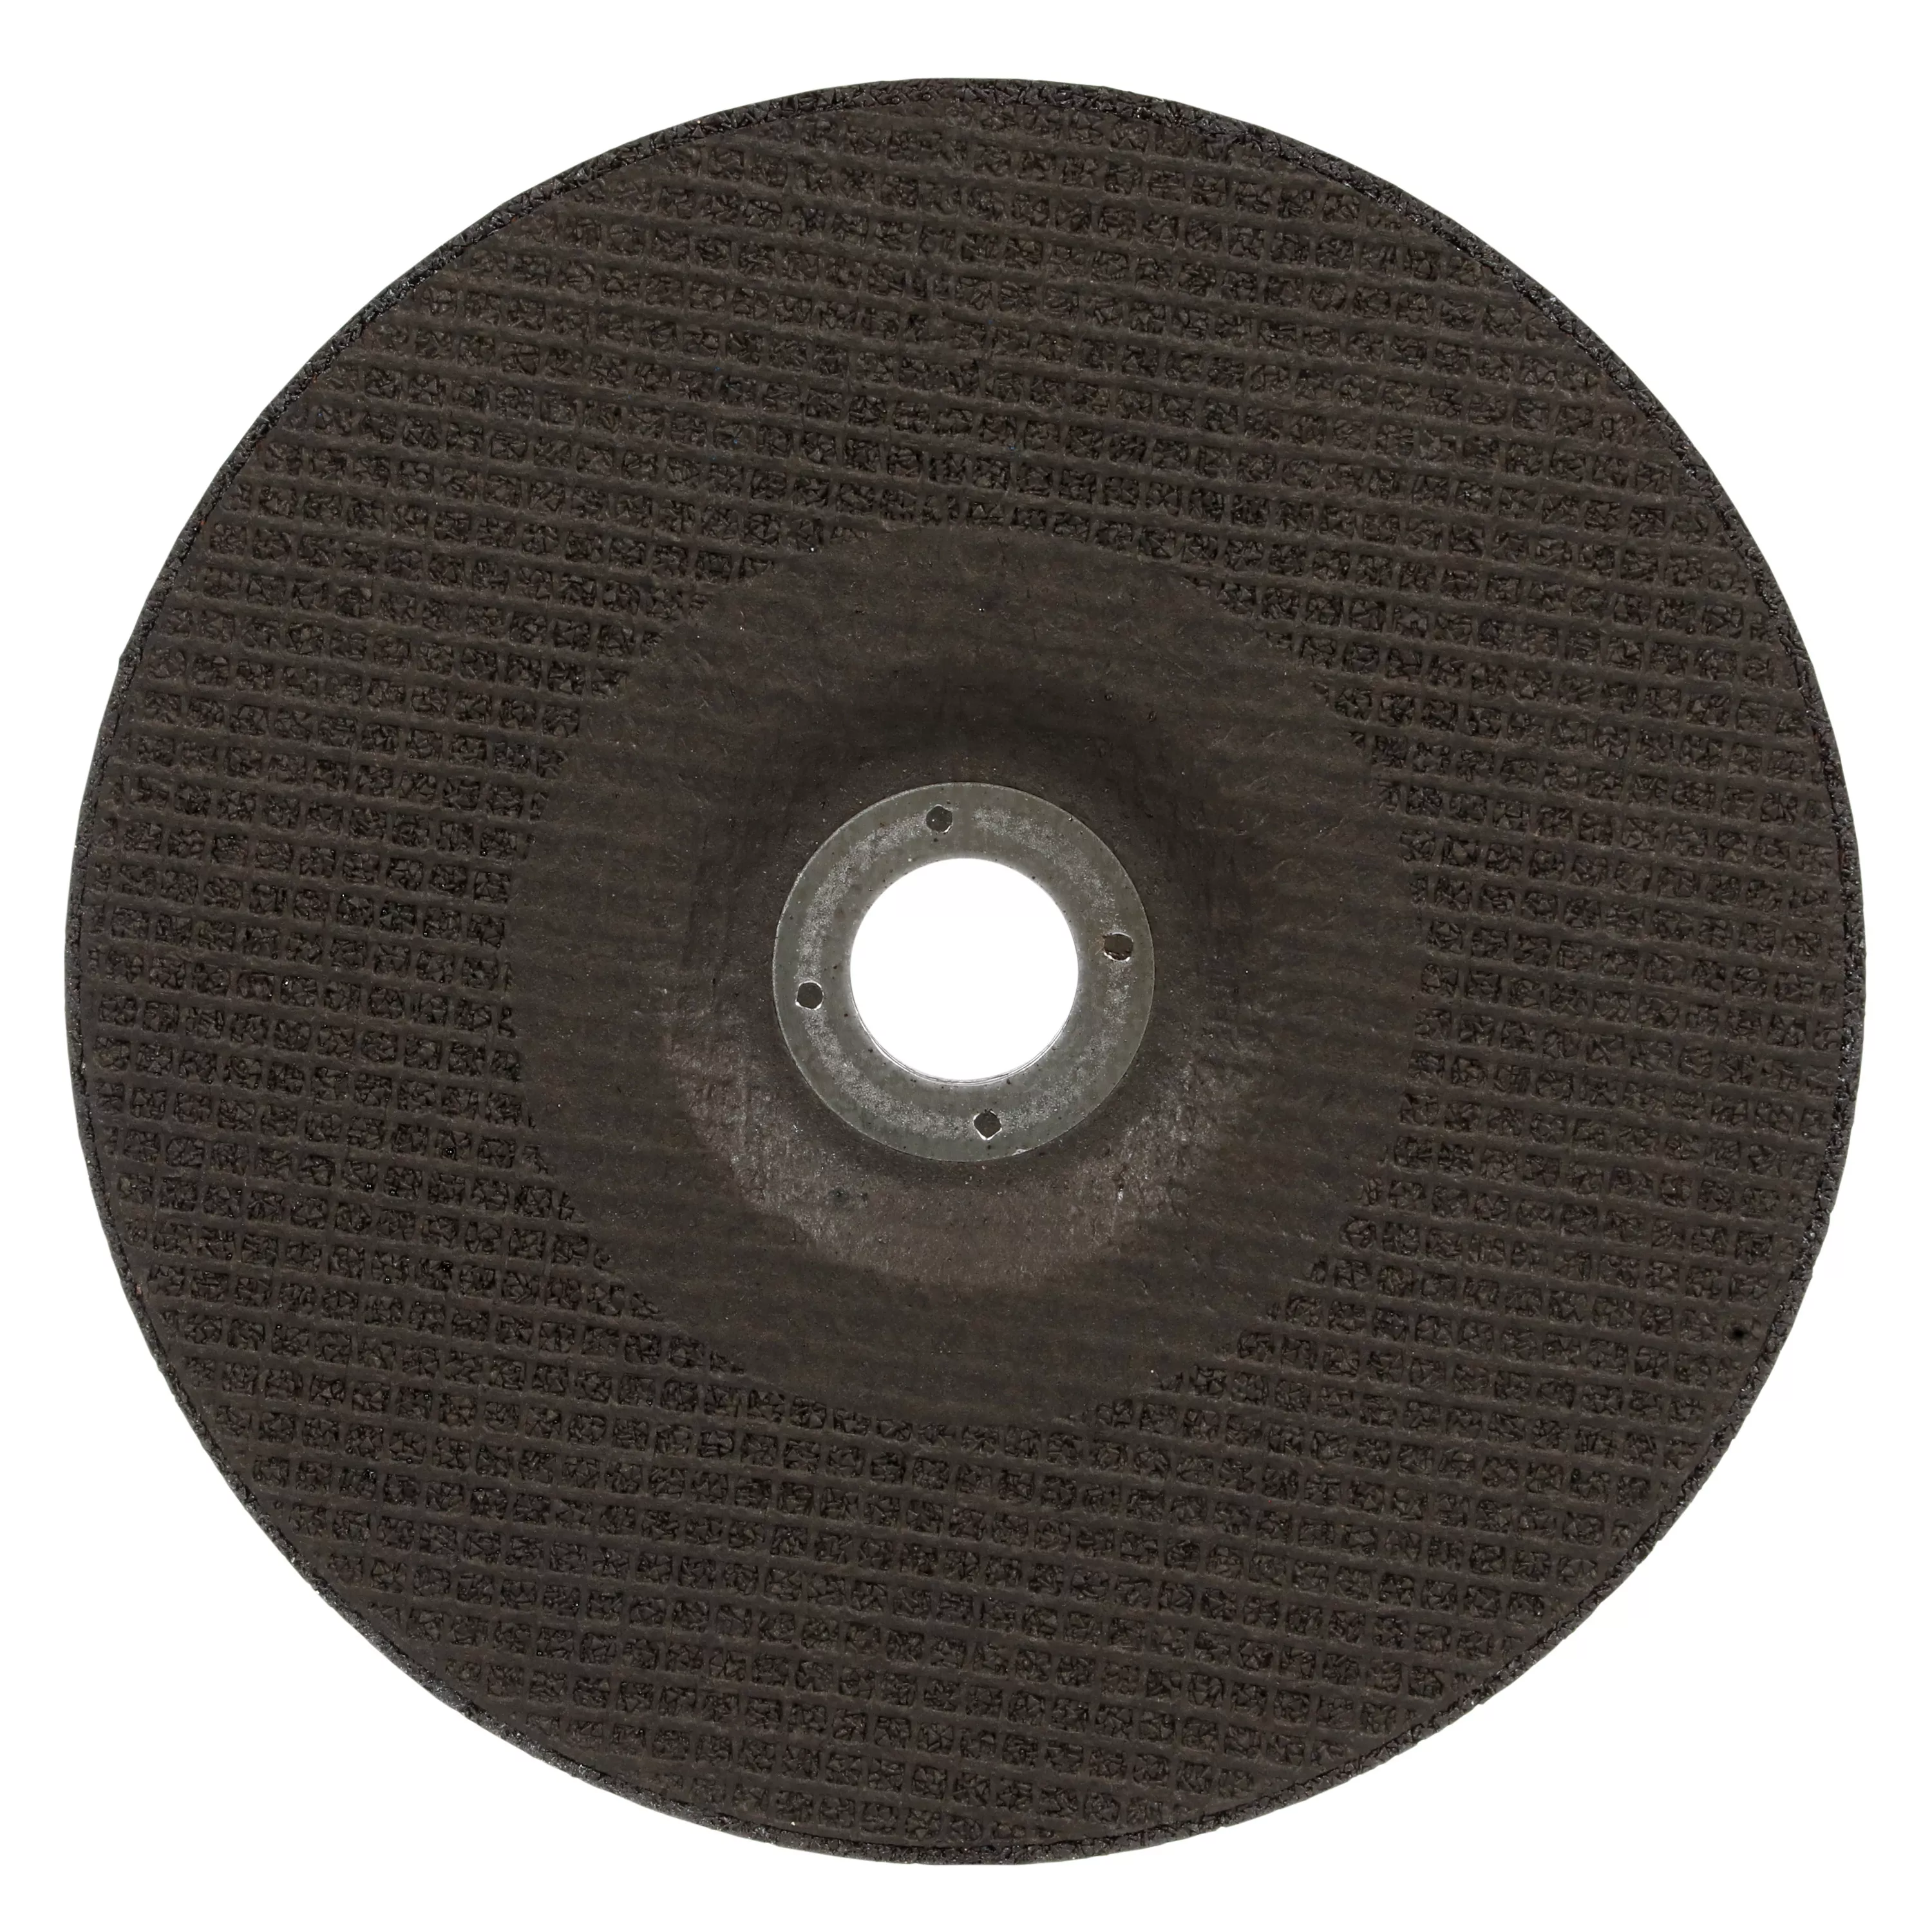 Product Number 90021 | 3M™ Cubitron™ 3 Cut and Grind Wheel